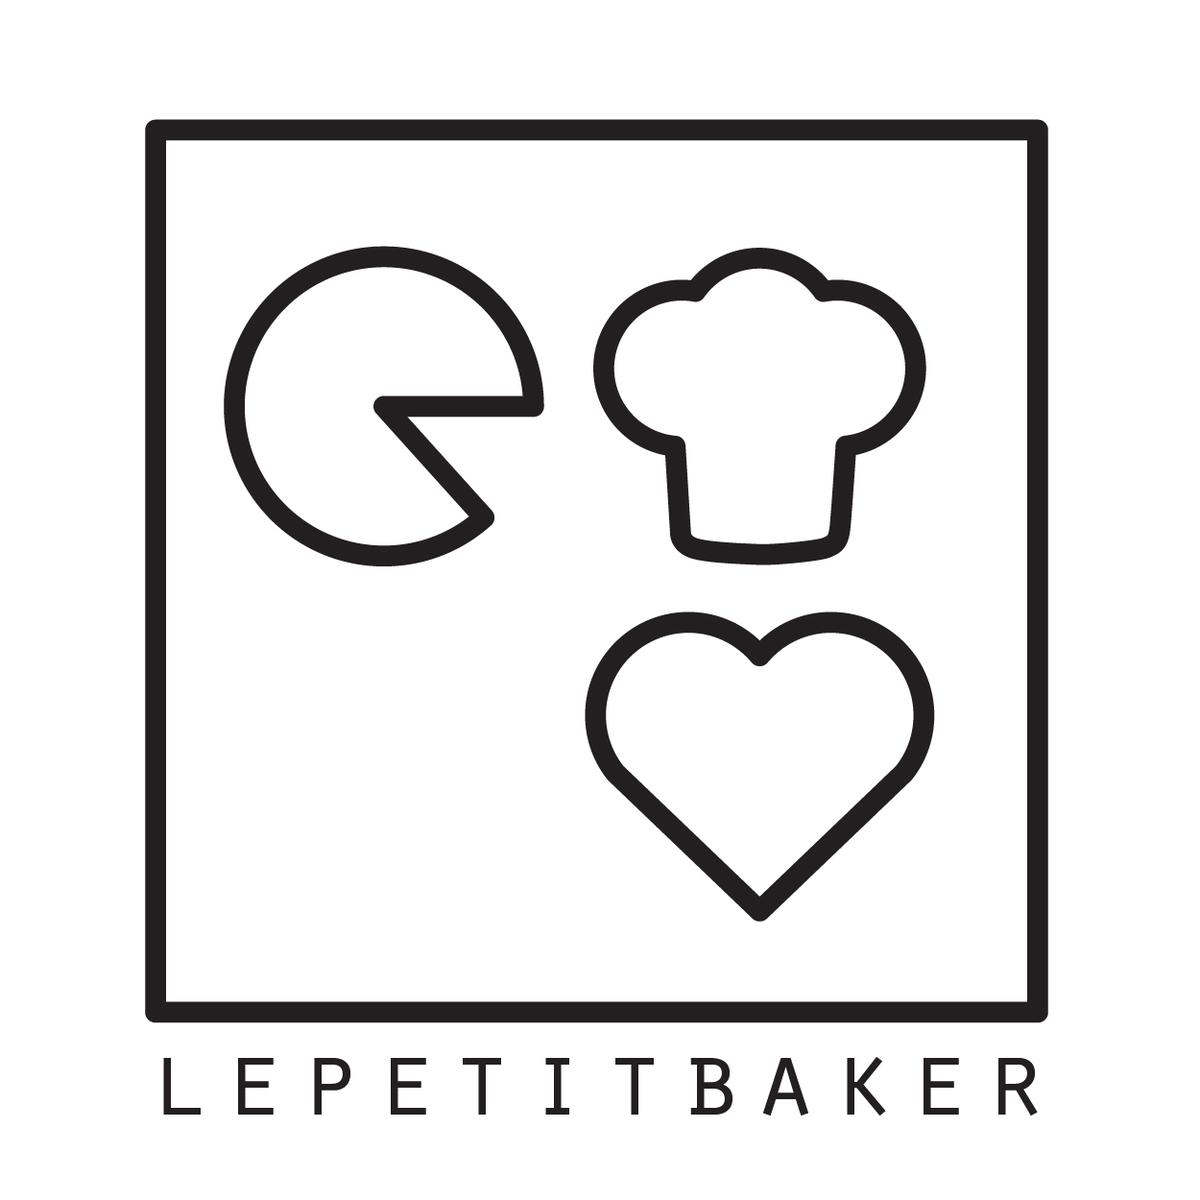 LePetitBakerSG's images